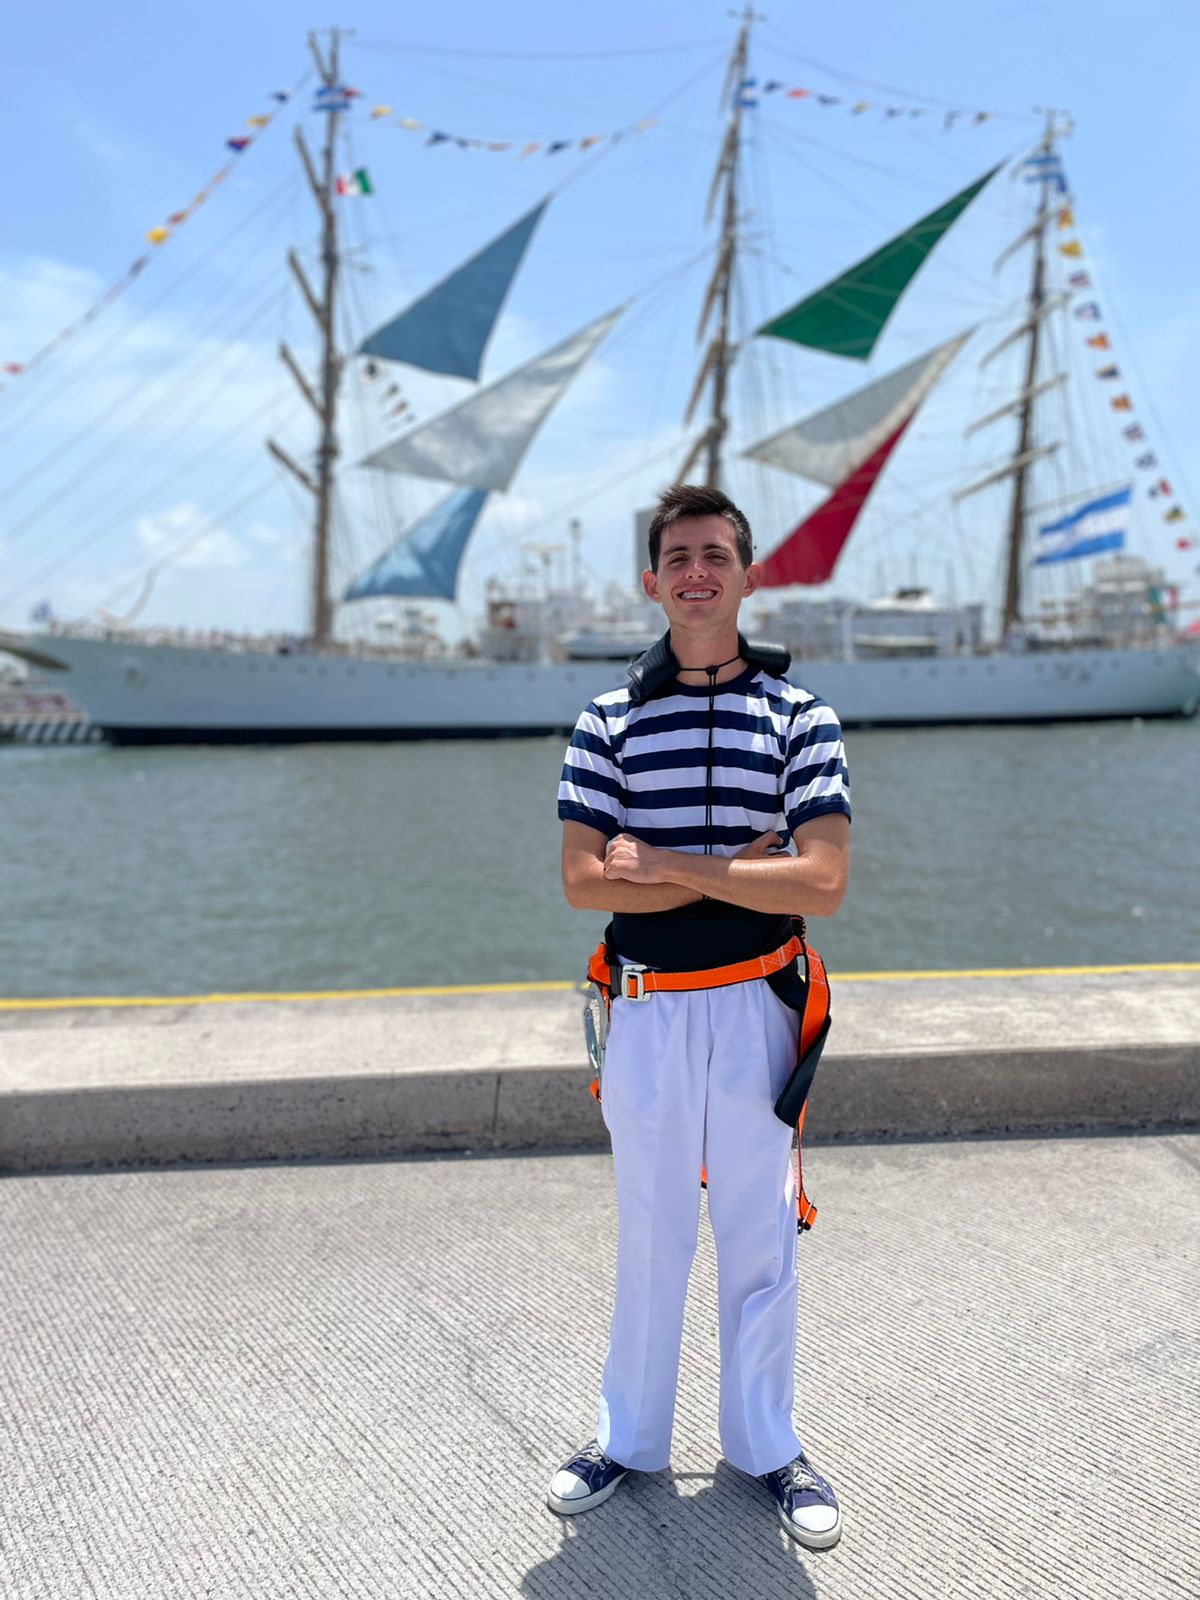 Hernán Pedemonte, Commissioned Midshipman, in the port of Veracruz, Mexico, with the frigate ARA Libertad in the background